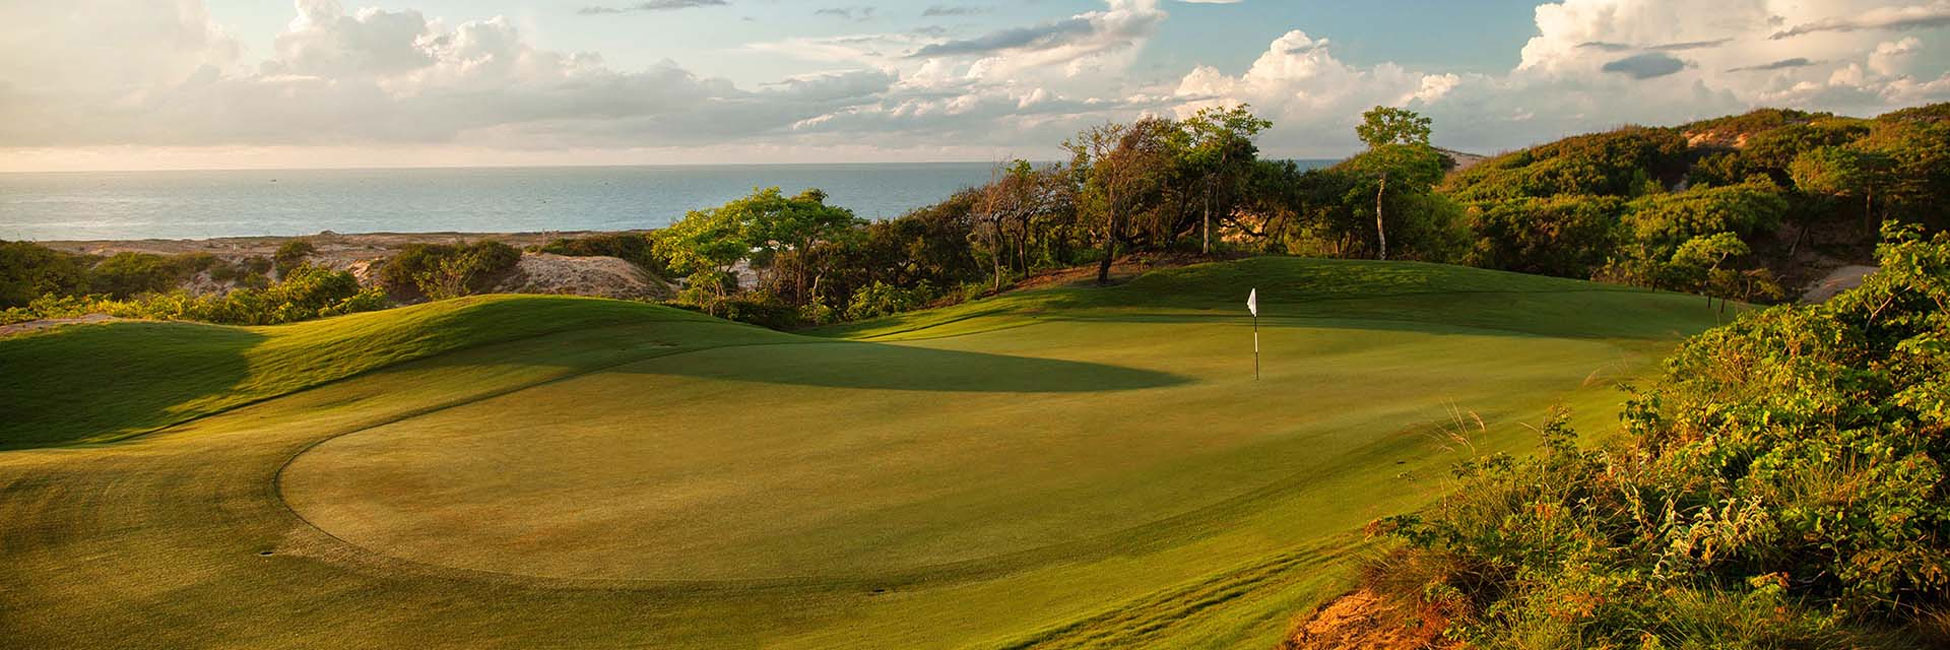 Golf Courses in Ho Chi Minh